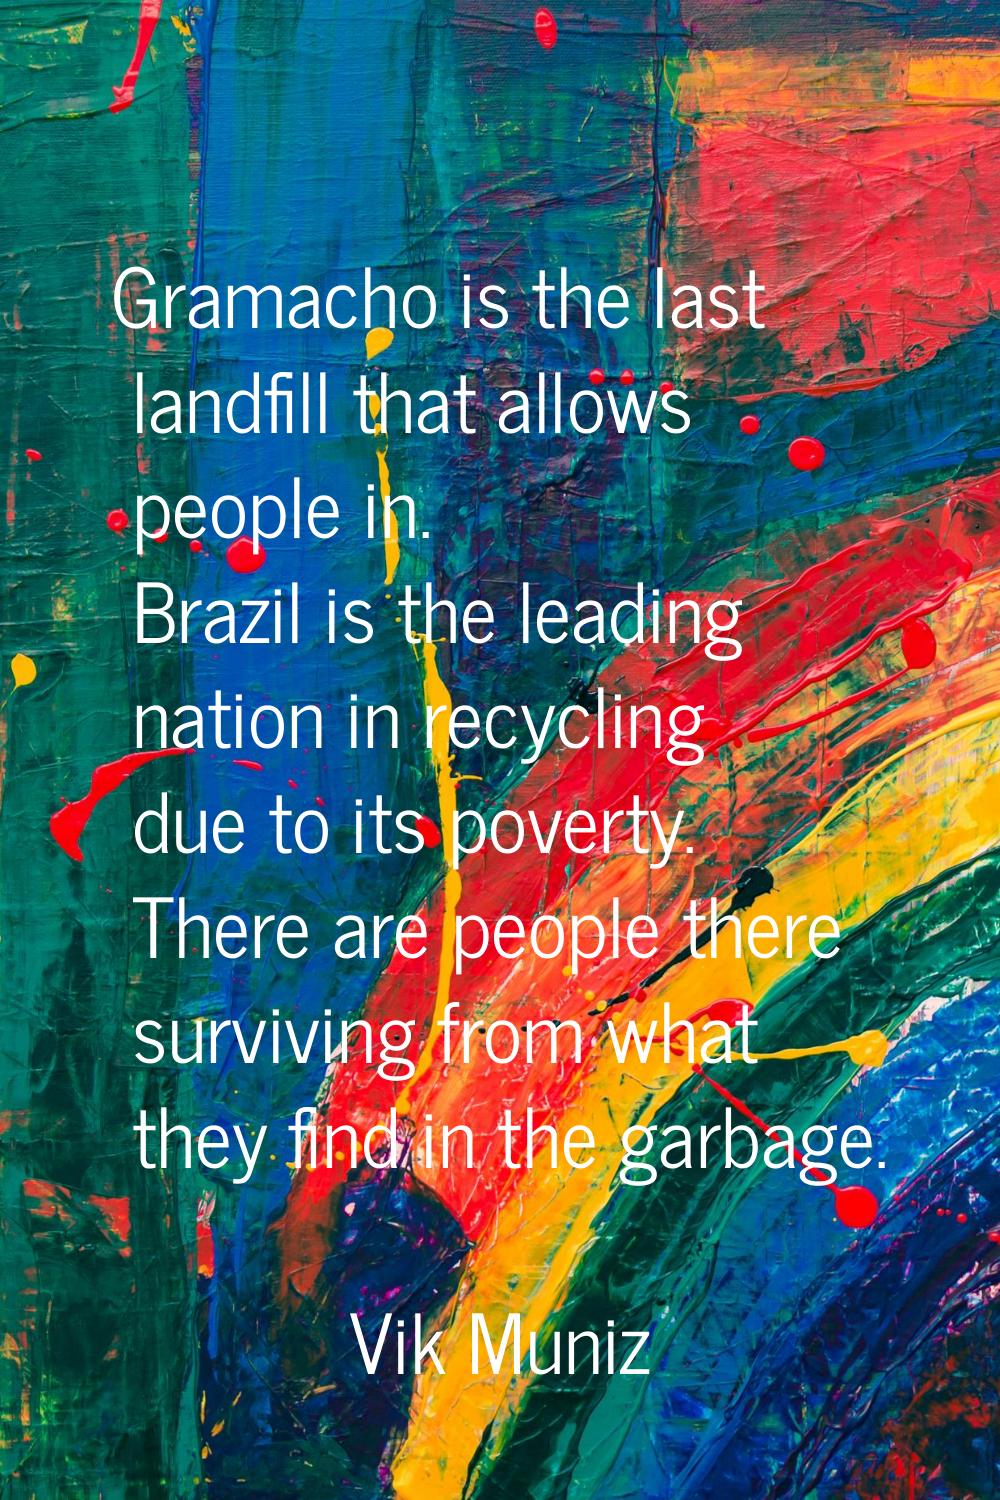 Gramacho is the last landfill that allows people in. Brazil is the leading nation in recycling due 